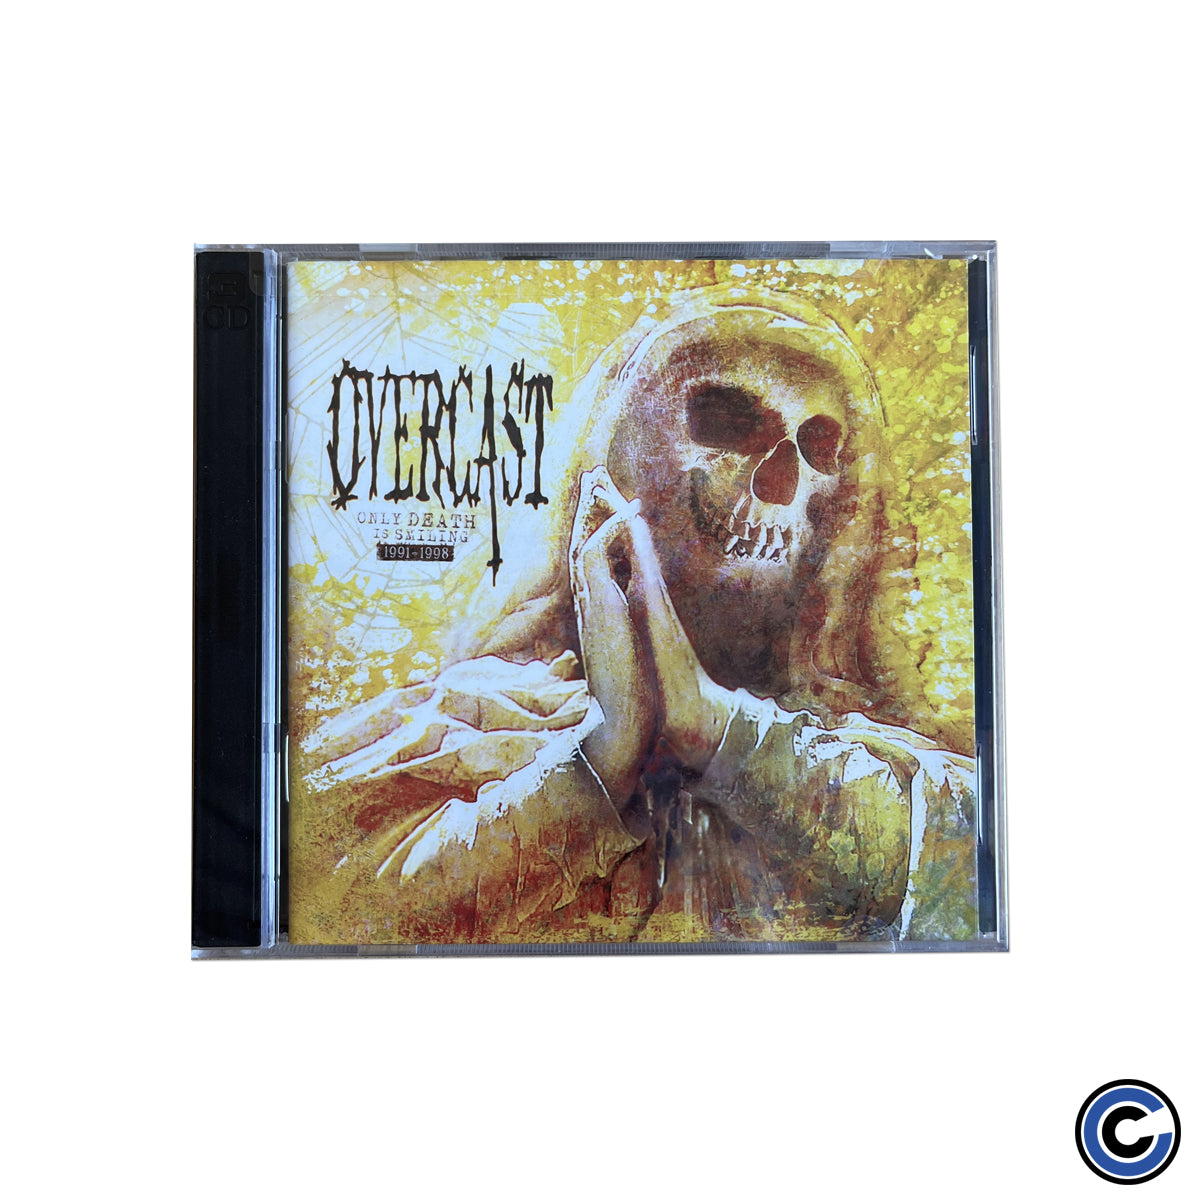 Overcast "Only Death Is Smiling 1991-1998" 3xCD